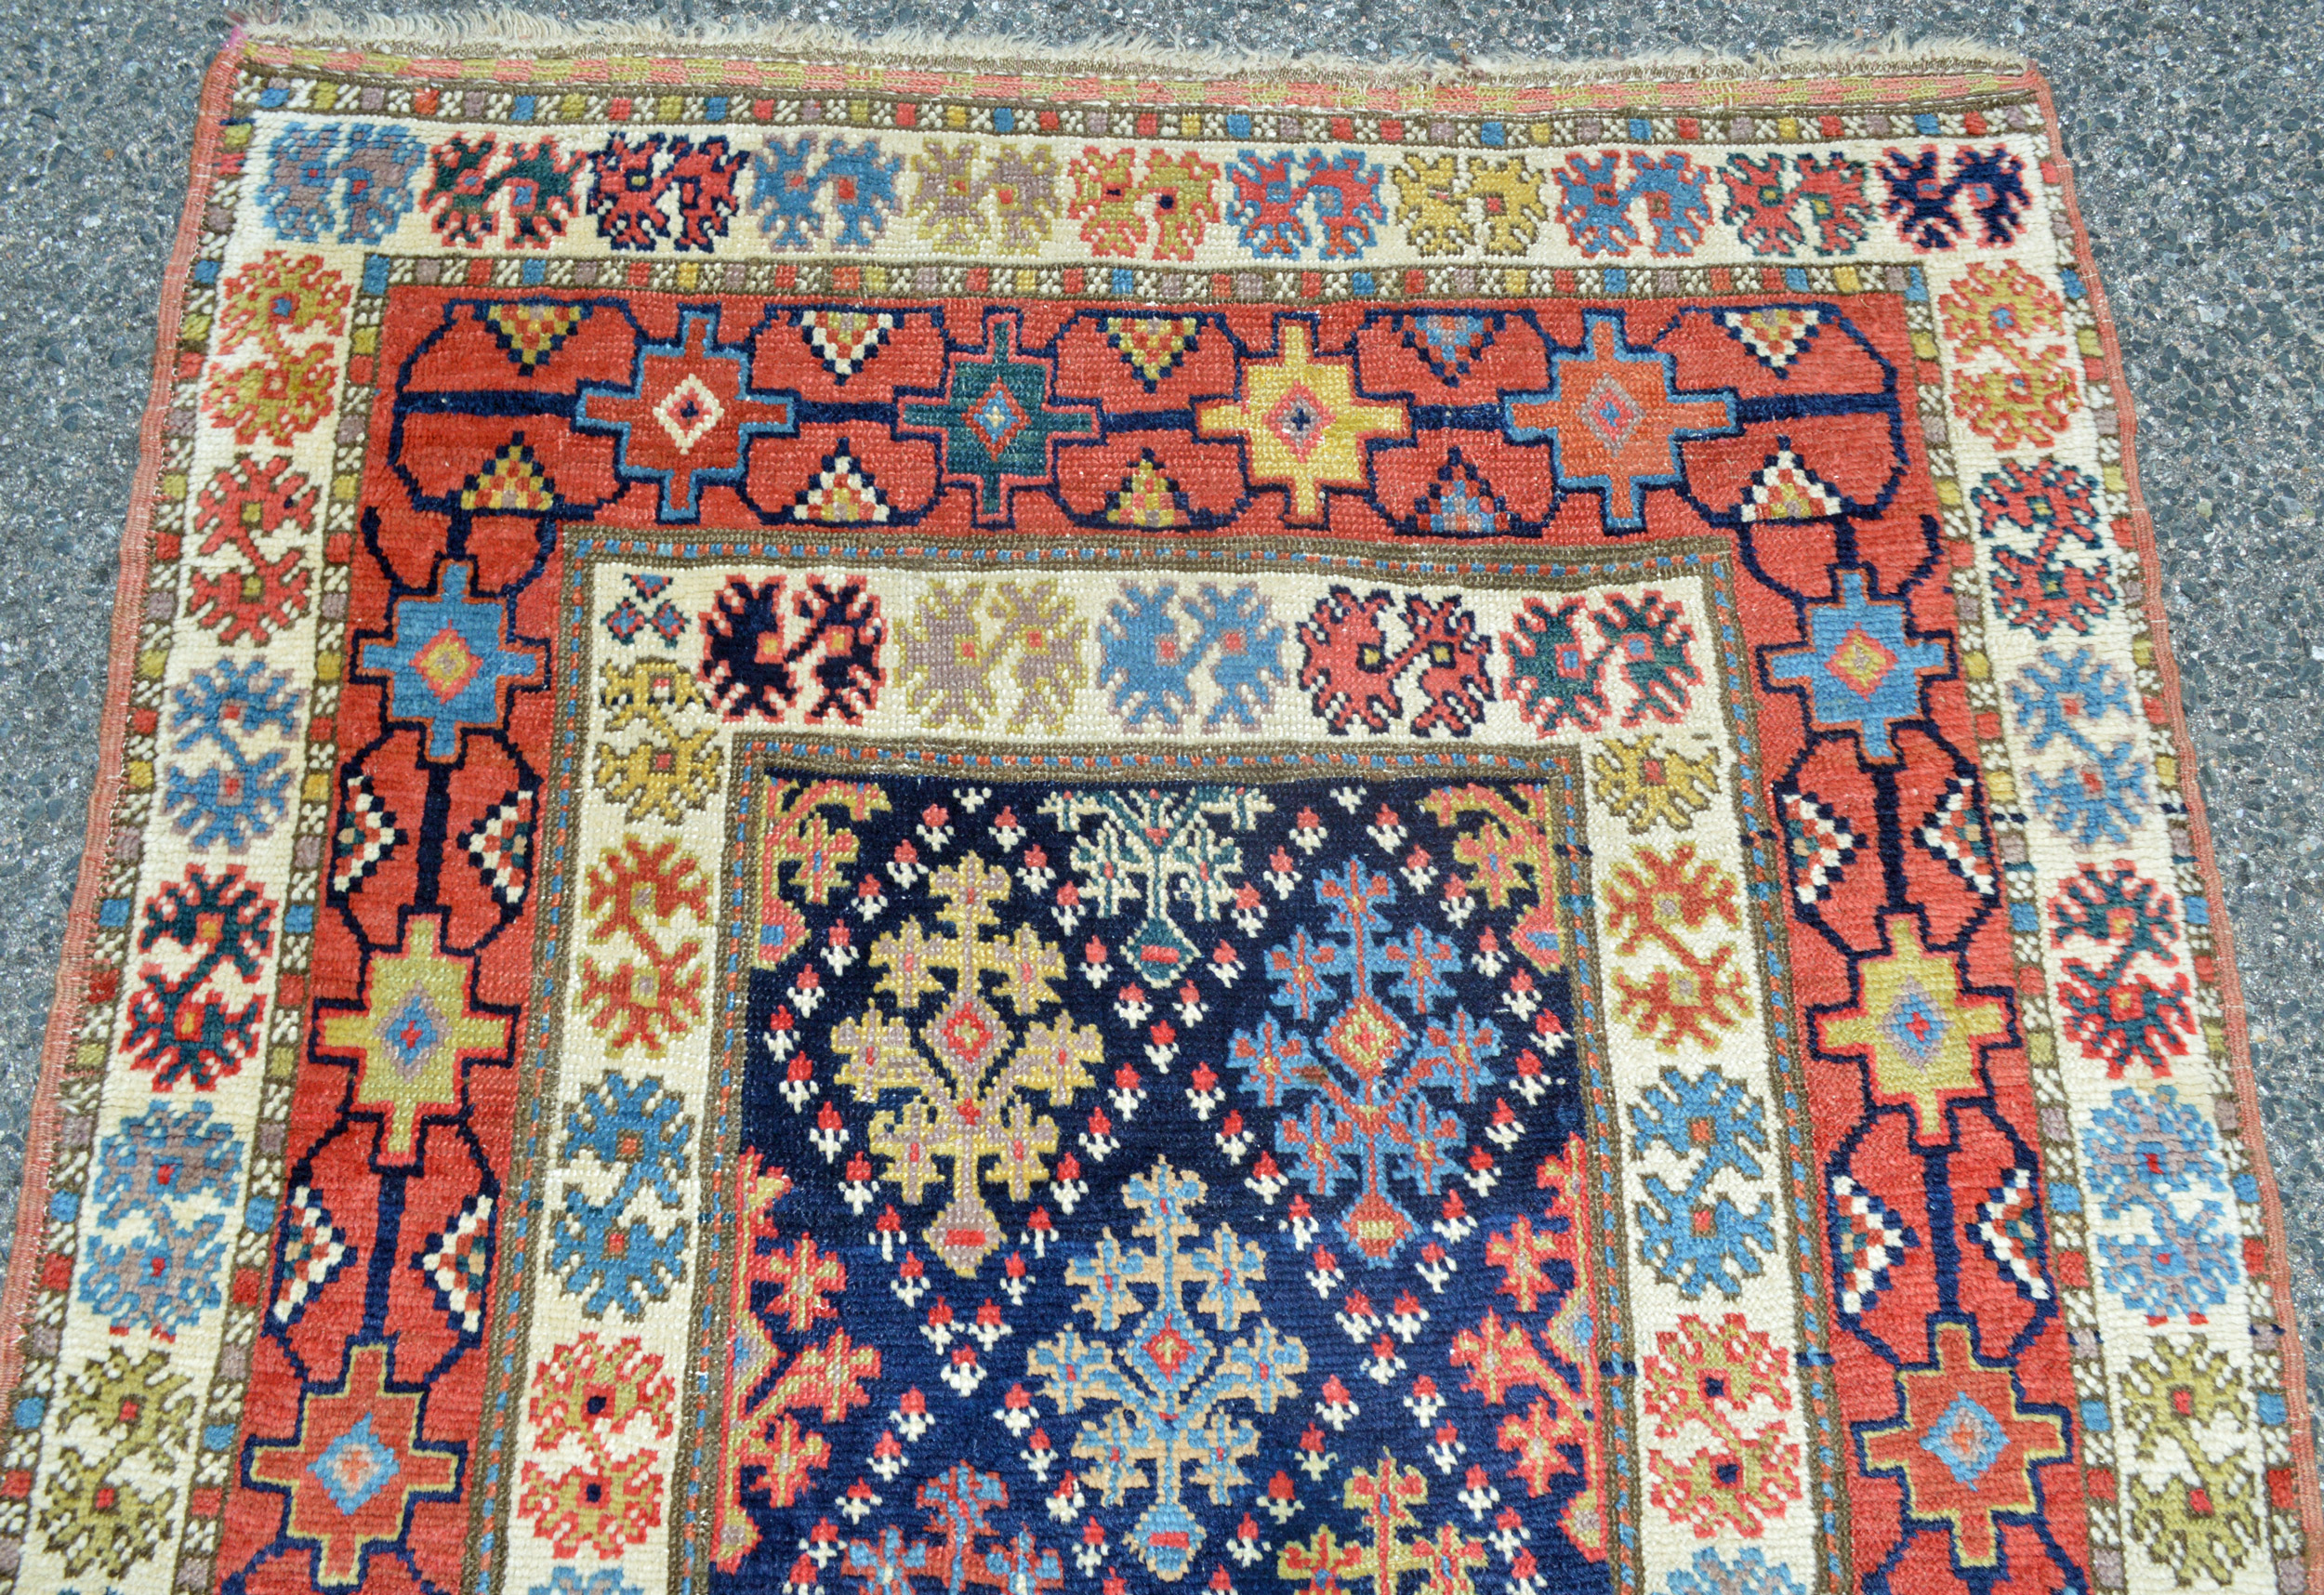 End and selvedge detail from an antique Oriental runner rug, possibly northwest Persian or Turkish, circa 1890, Douglas Stock Gallery, antique Persian runners, antique runner rugs Boston,MA area, antique rugs Brookline, Newton, Weston, Wellesley, South Natick,MA area antique rugs